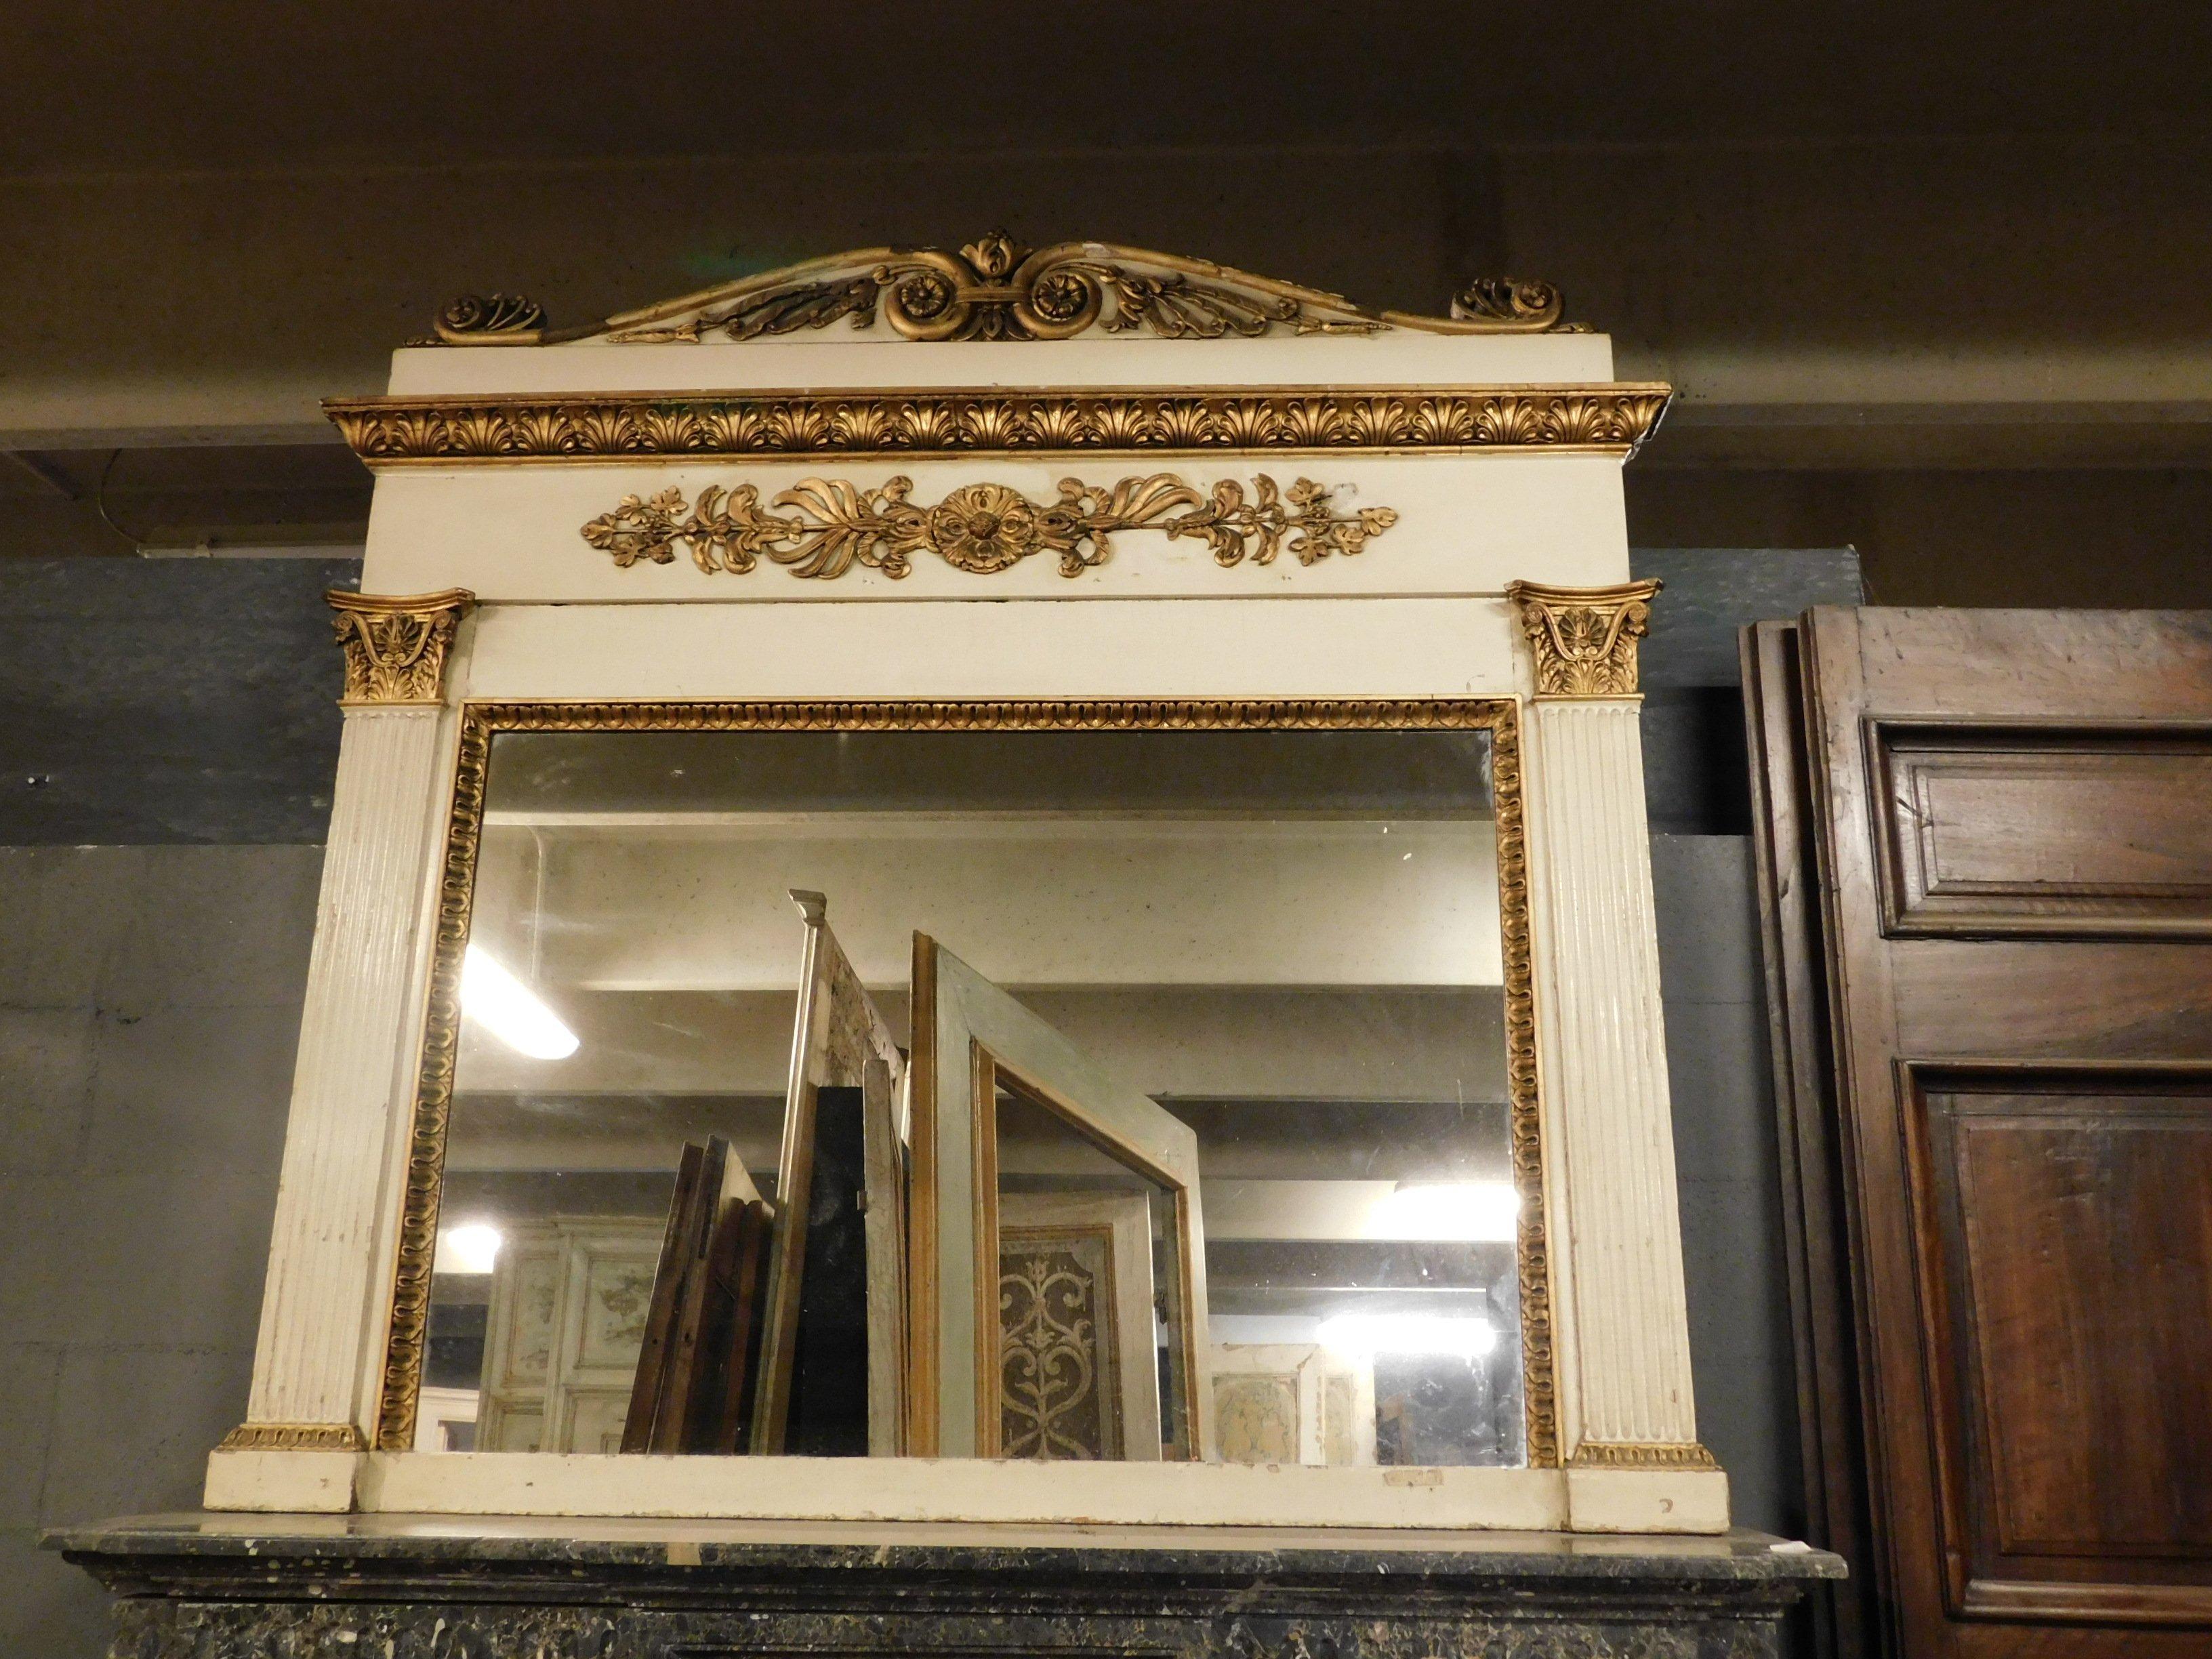 Antique mirror in carved wood with columns and period friezes, ivory lacquered with golden decorations, hand carved and lacquered in the first half of the 19th century, for an important Italian palace.
Mirror that was born as a mirror above a